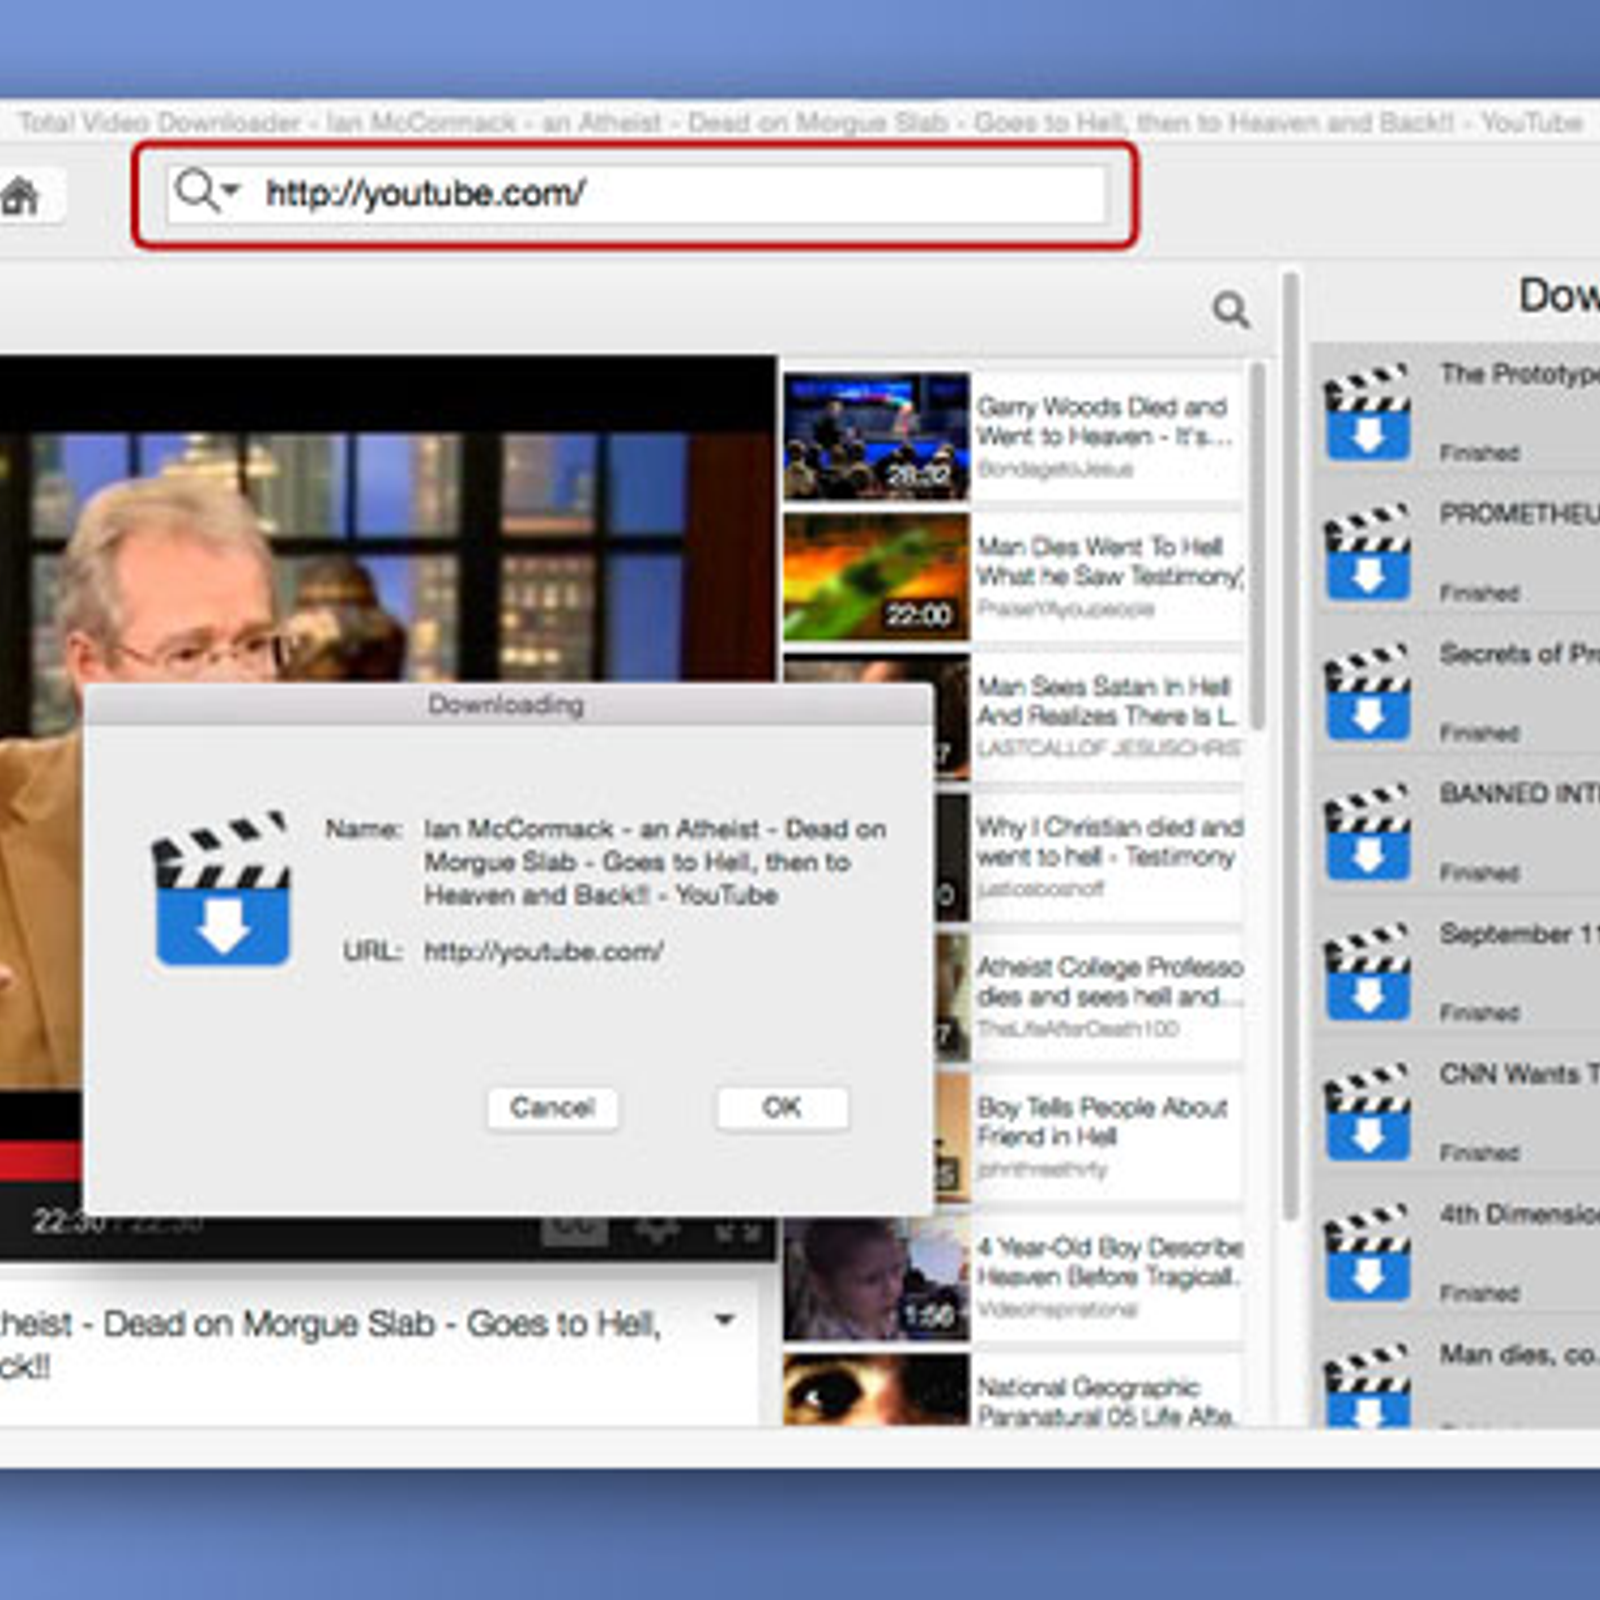 how to download hd youtube videos on mac